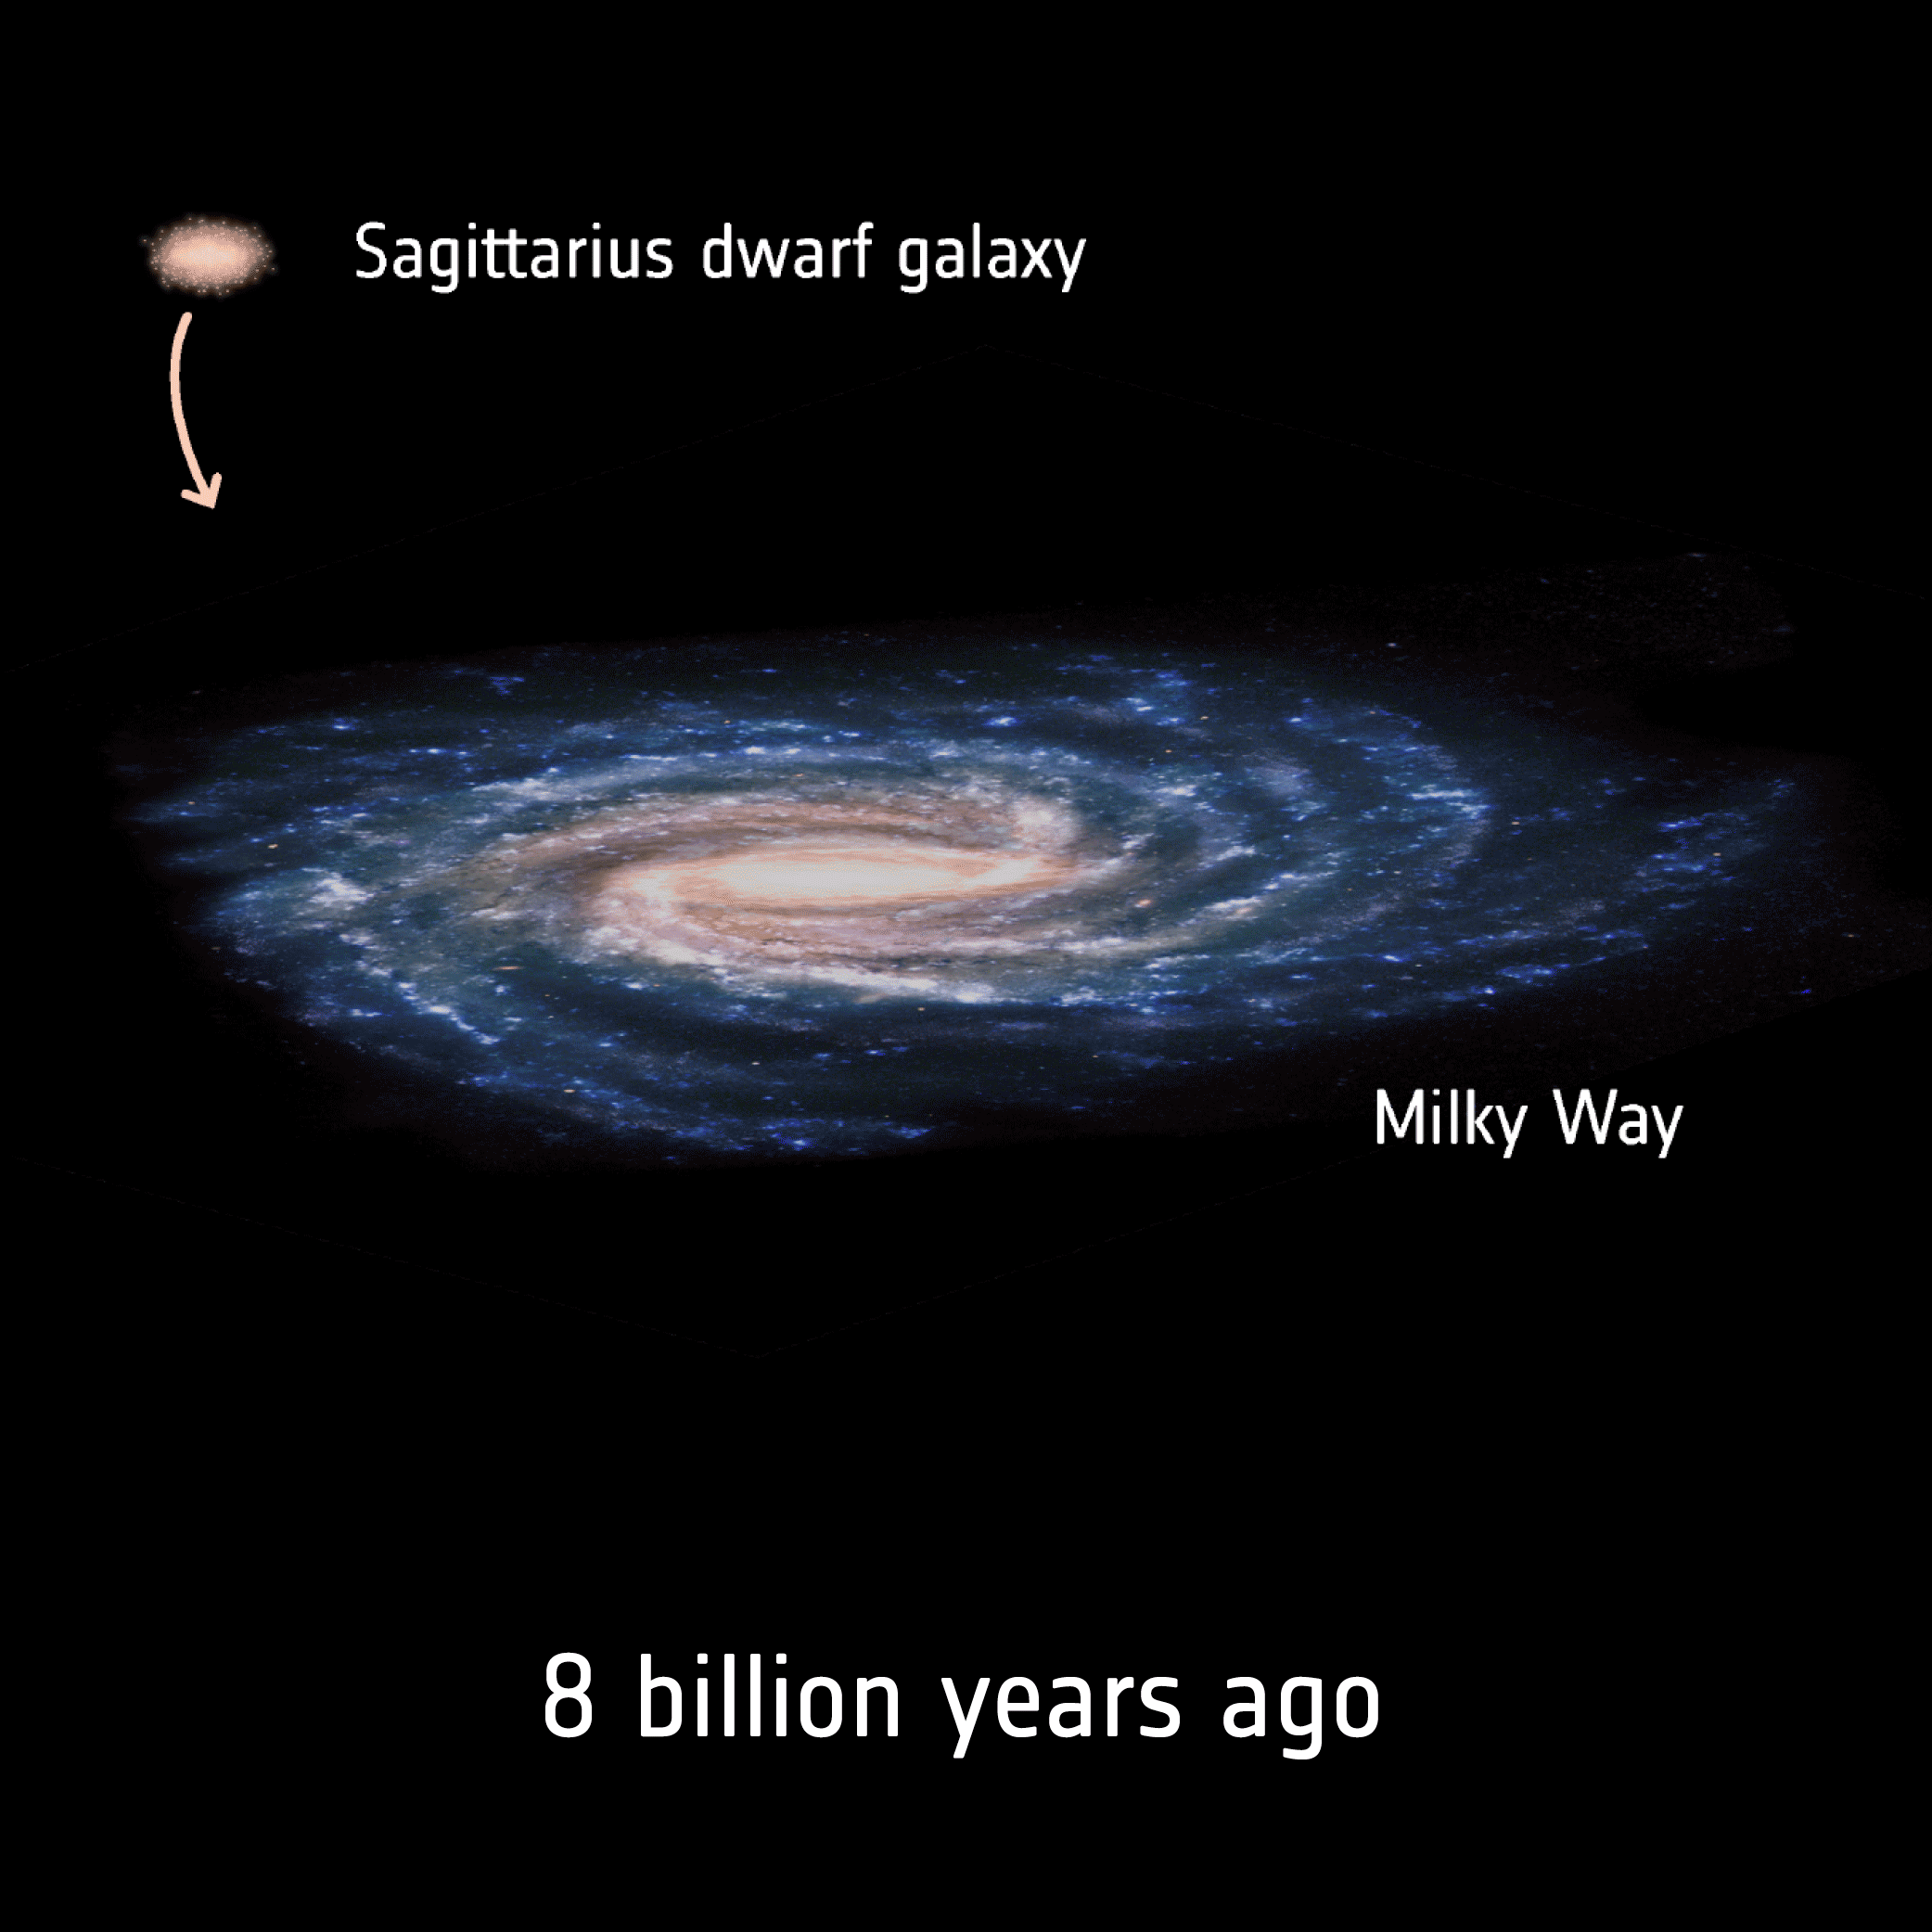 Figure 65: The Sagittarius dwarf galaxy has been orbiting the Milky Way for billions for years. As its orbit around the 10,000 more massive Milky Way gradually tightened, it started colliding with our galaxy's disc. The three known collisions between Sagittarius and the Milky Way have, according to a new study, triggered major star formation episodes, one of which may have given rise to the Solar System (image credit: ESA)